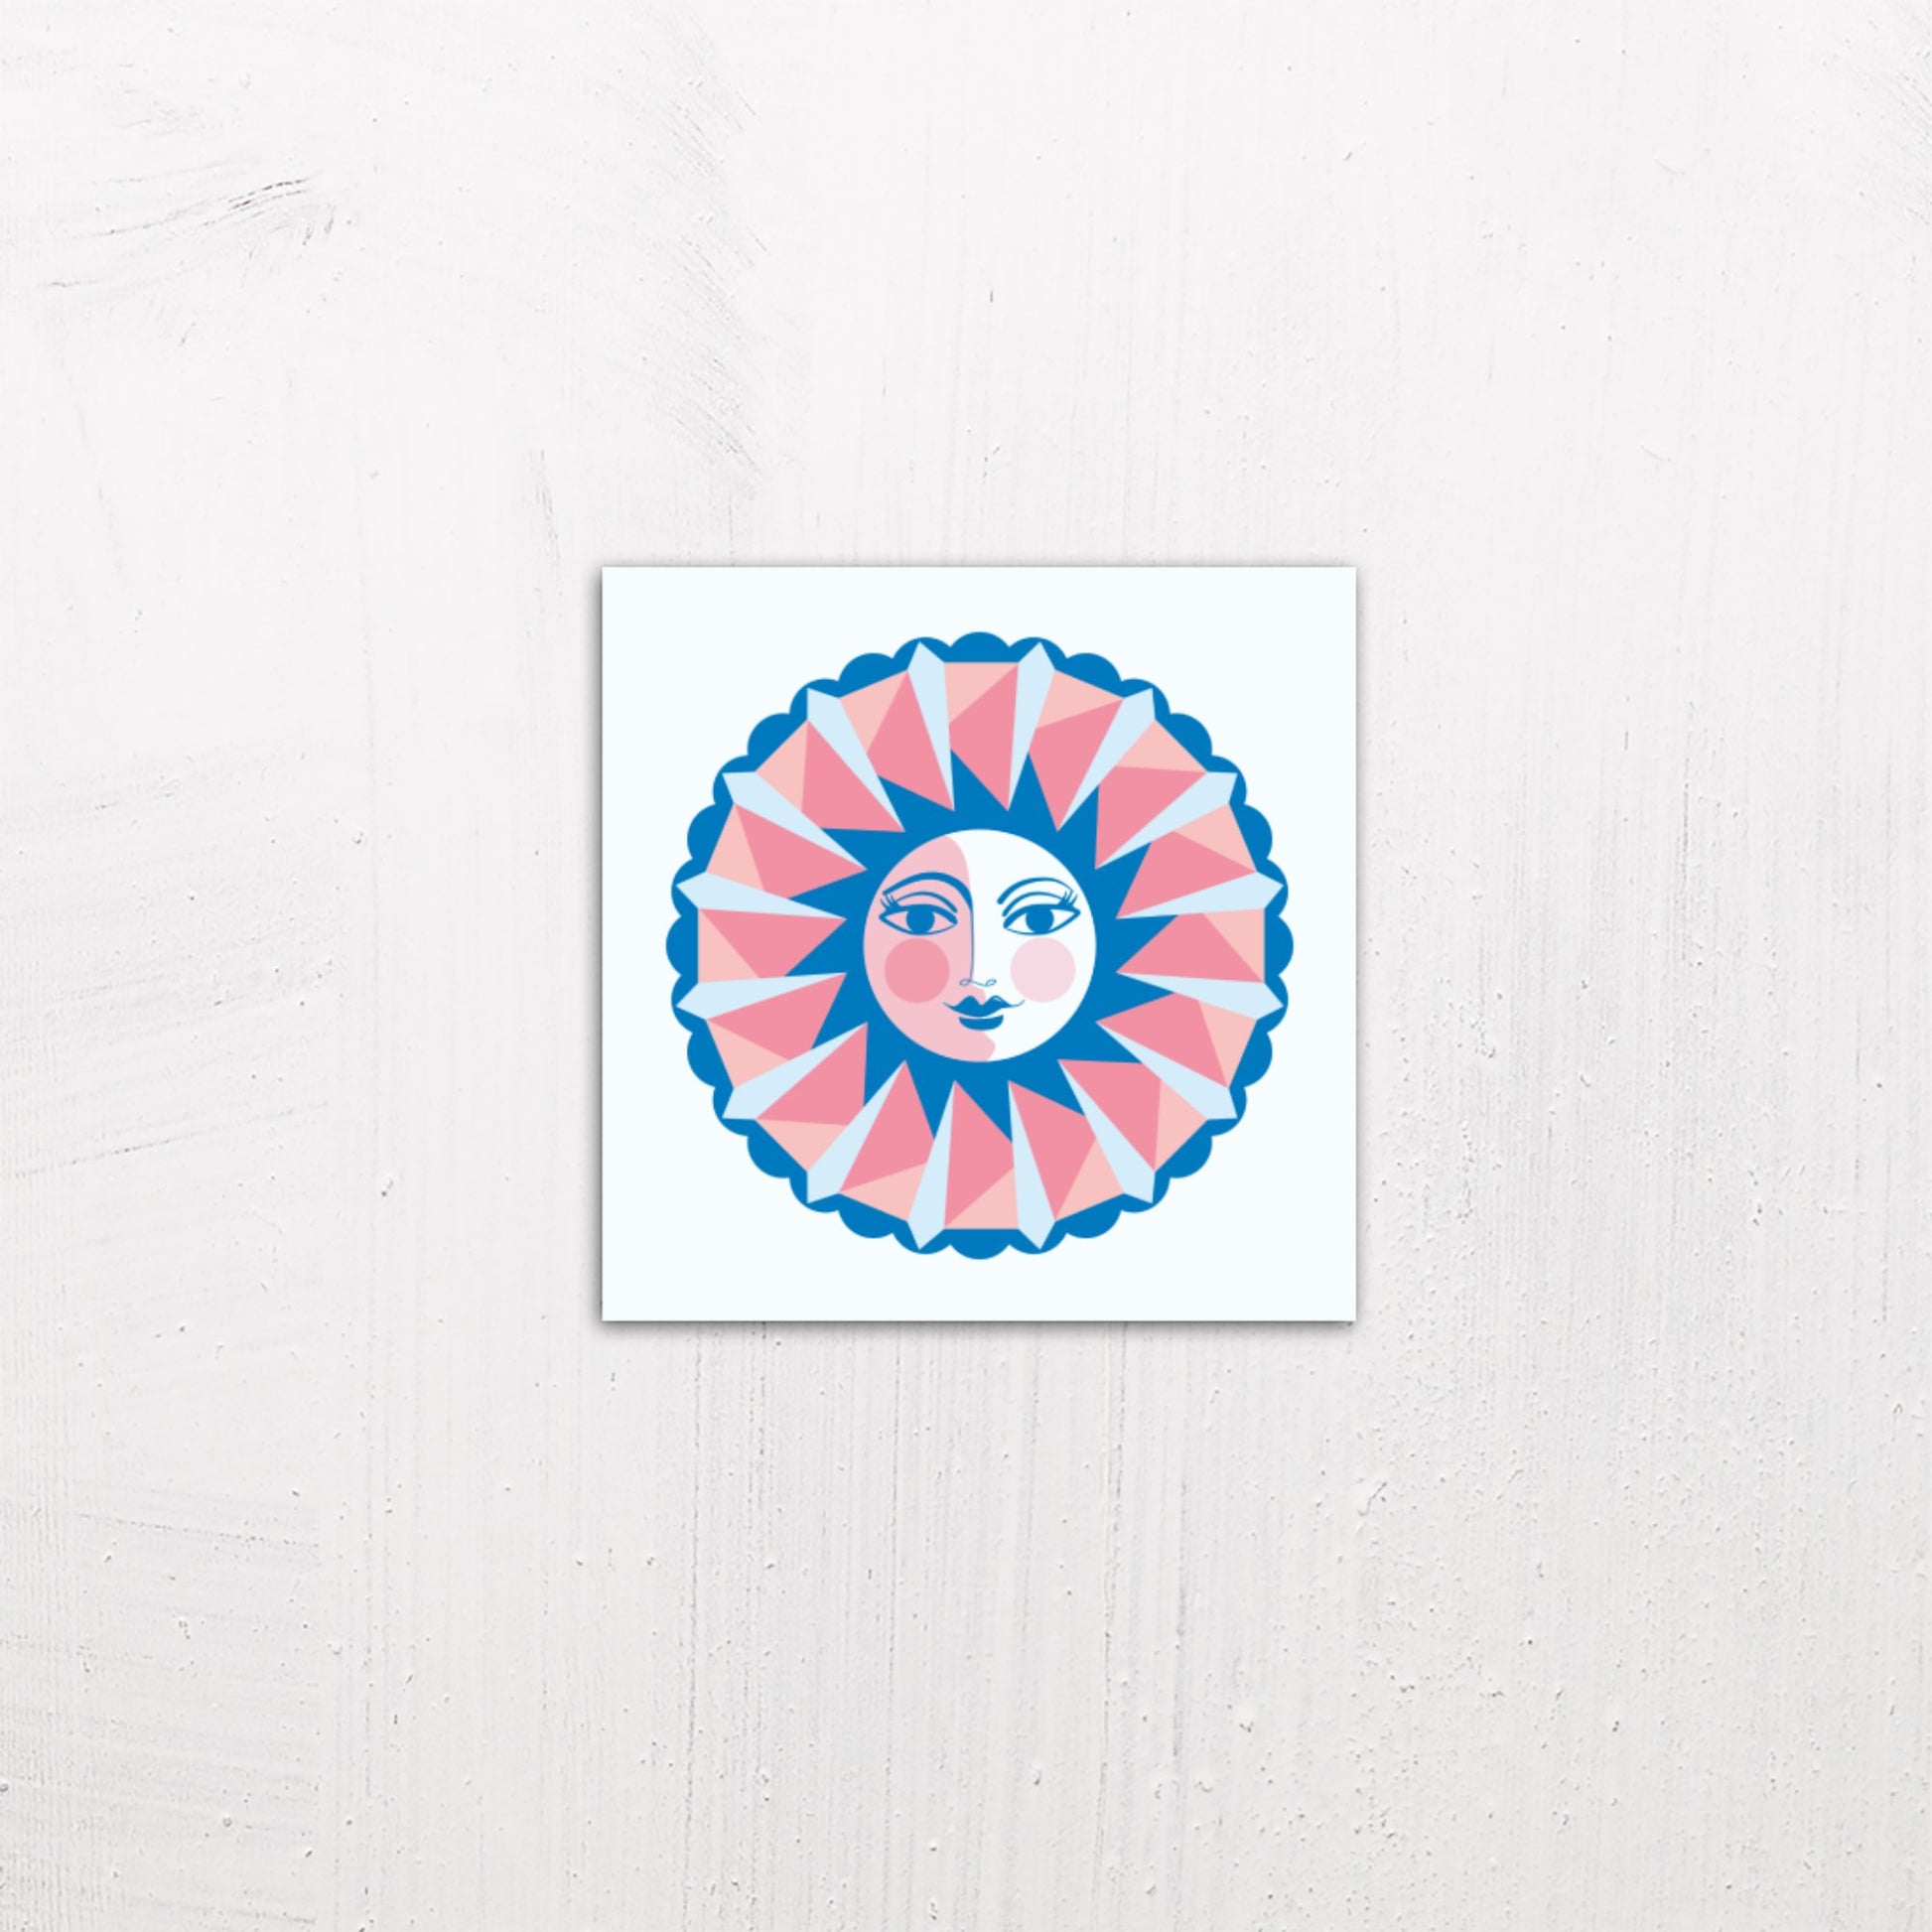 A small size metal art poster display plate with printed design of a Sun Face Design